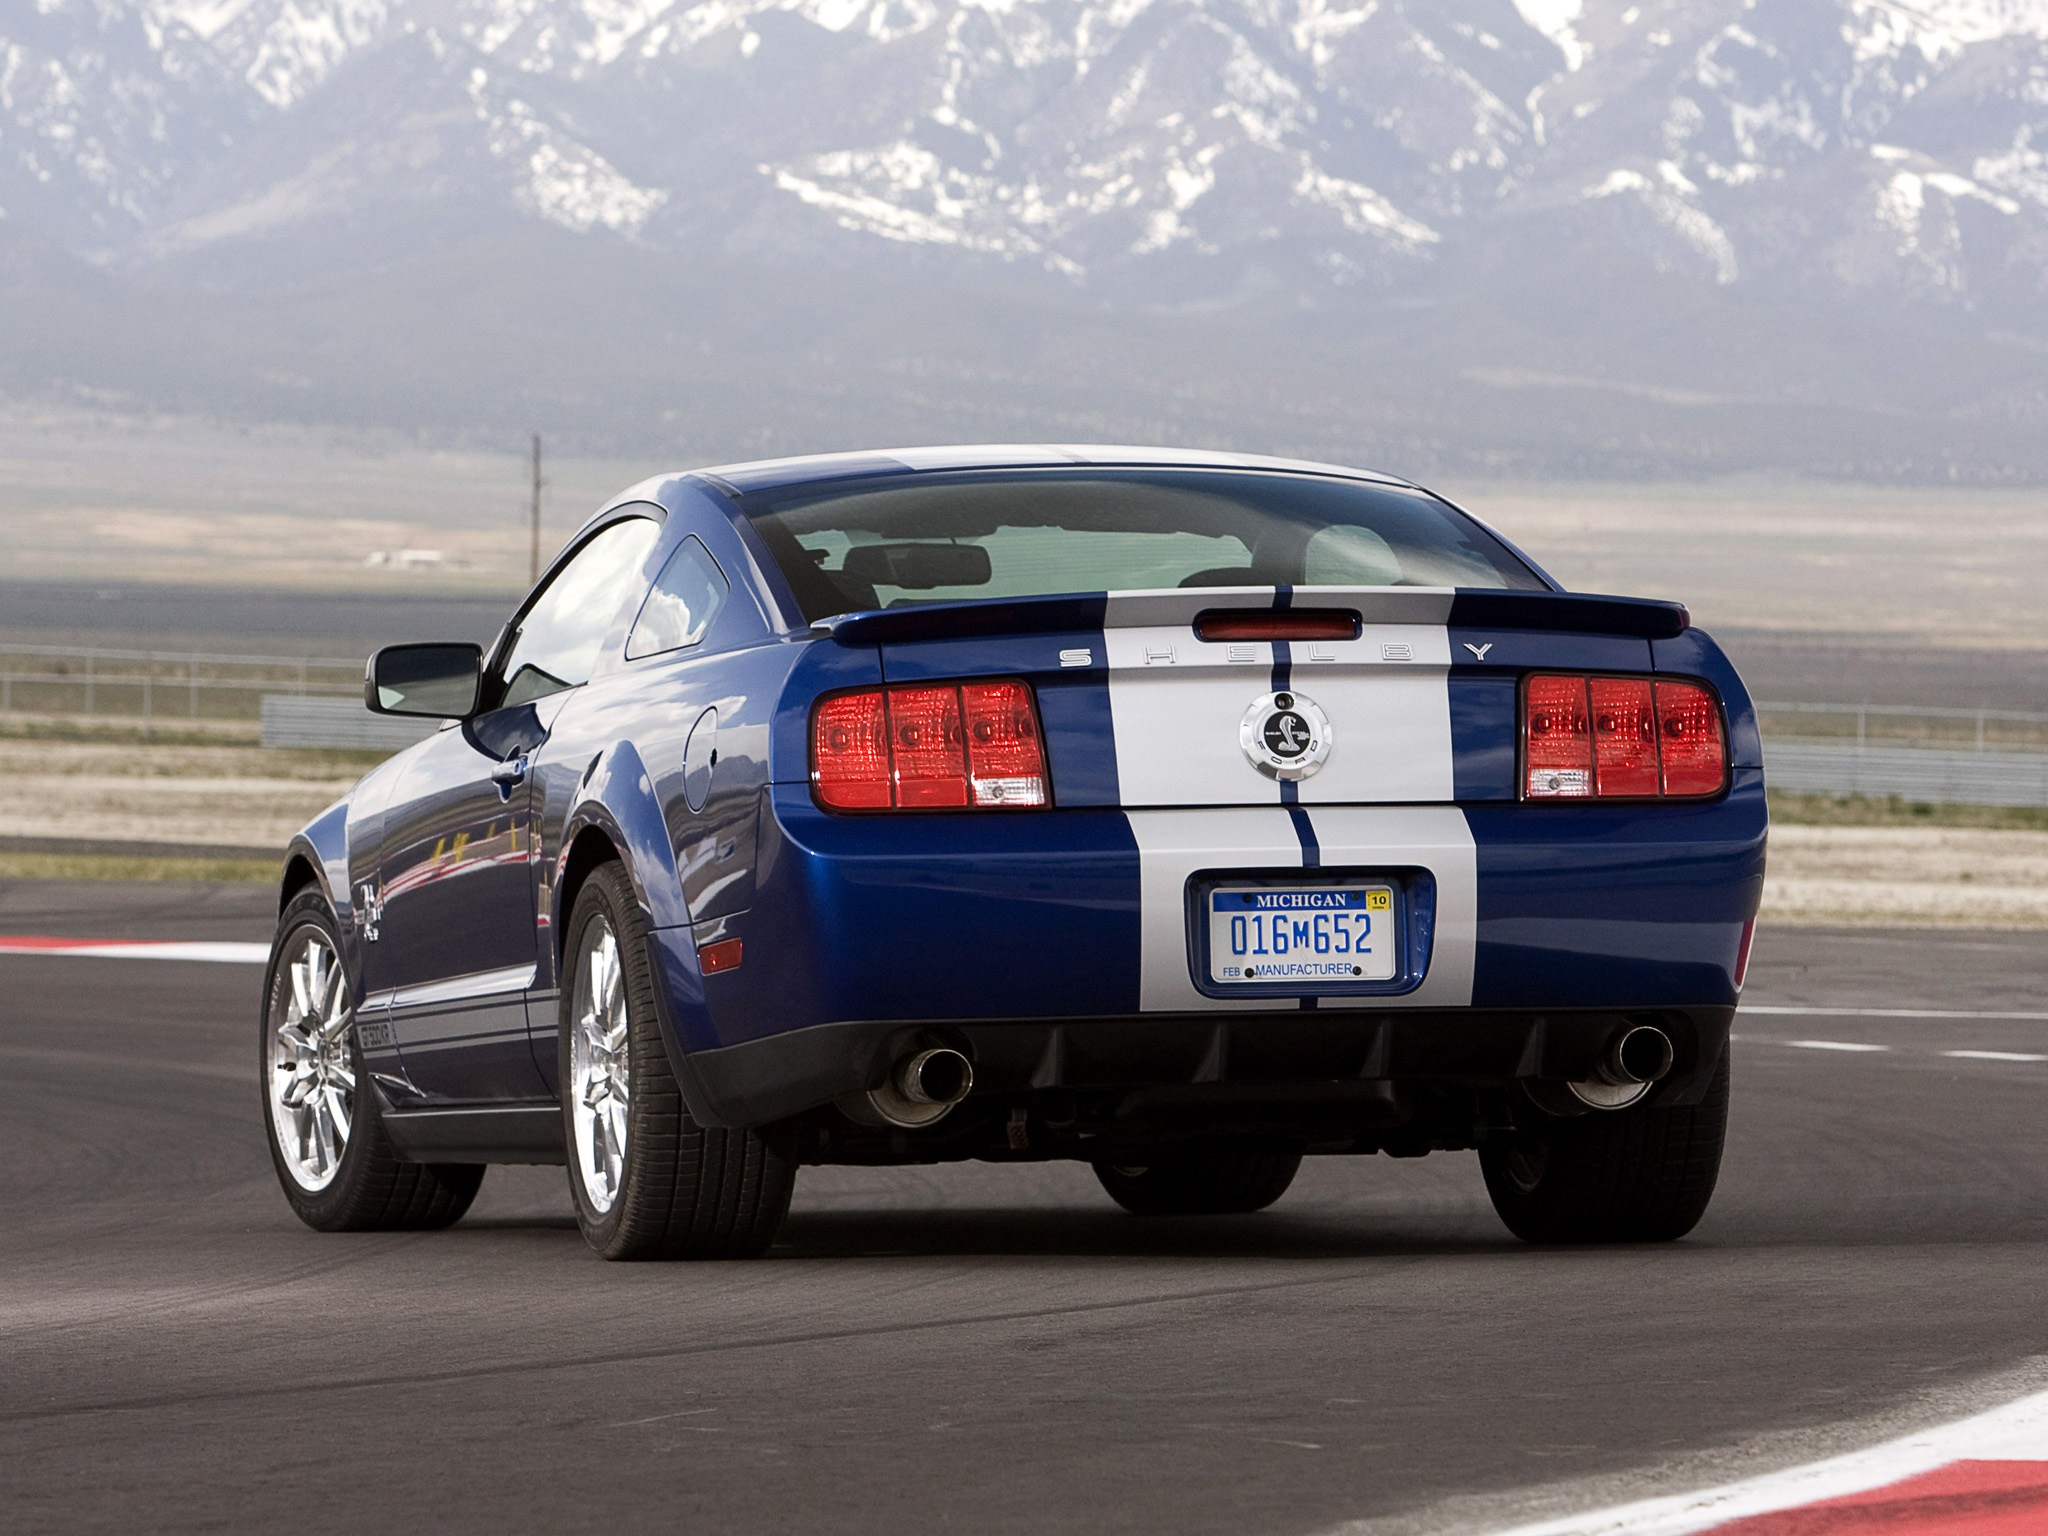 2008, Shelby, Gt500 kr, Gt500, Ford, Mustang, Muscle, Classic, Dw Wallpaper